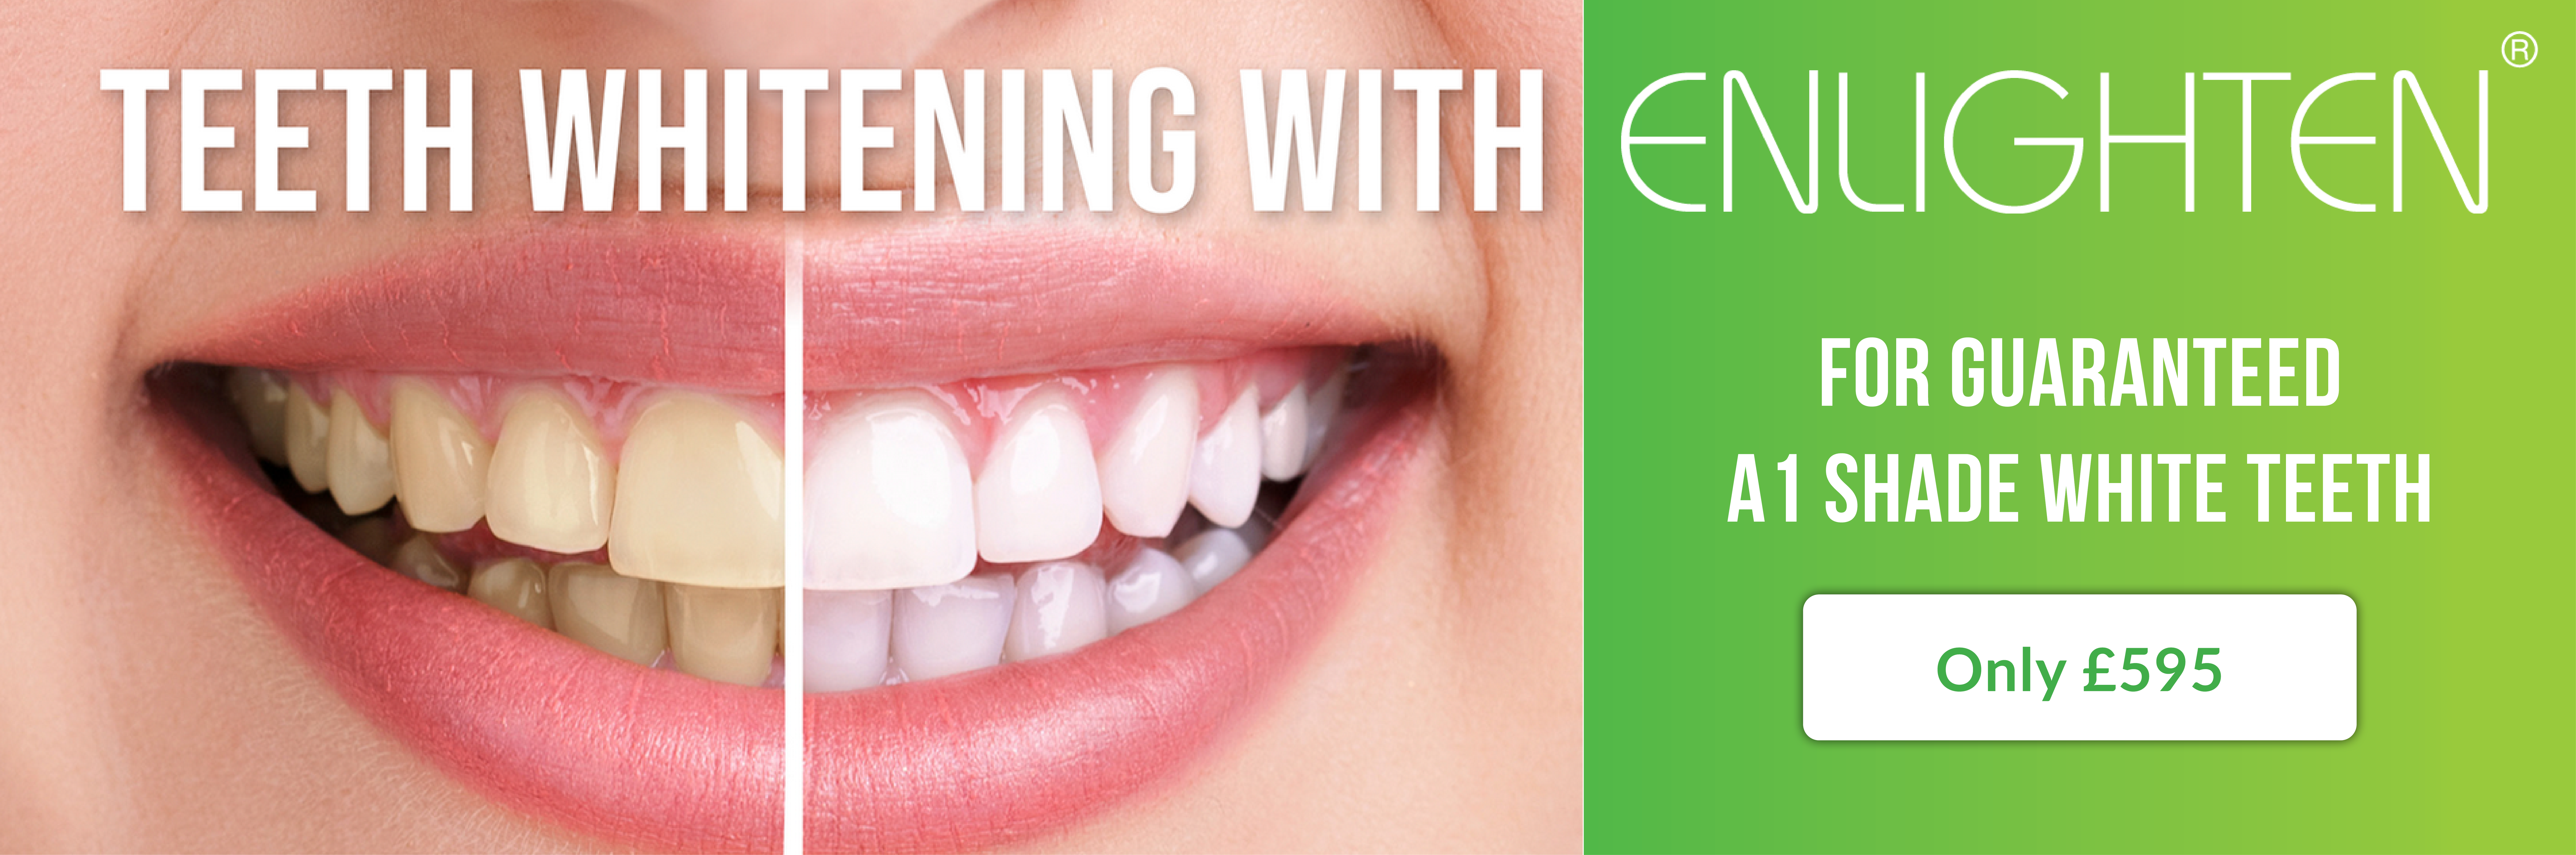 Teeth Whitening with Enlighten for guaranteed A1 shade white teeth